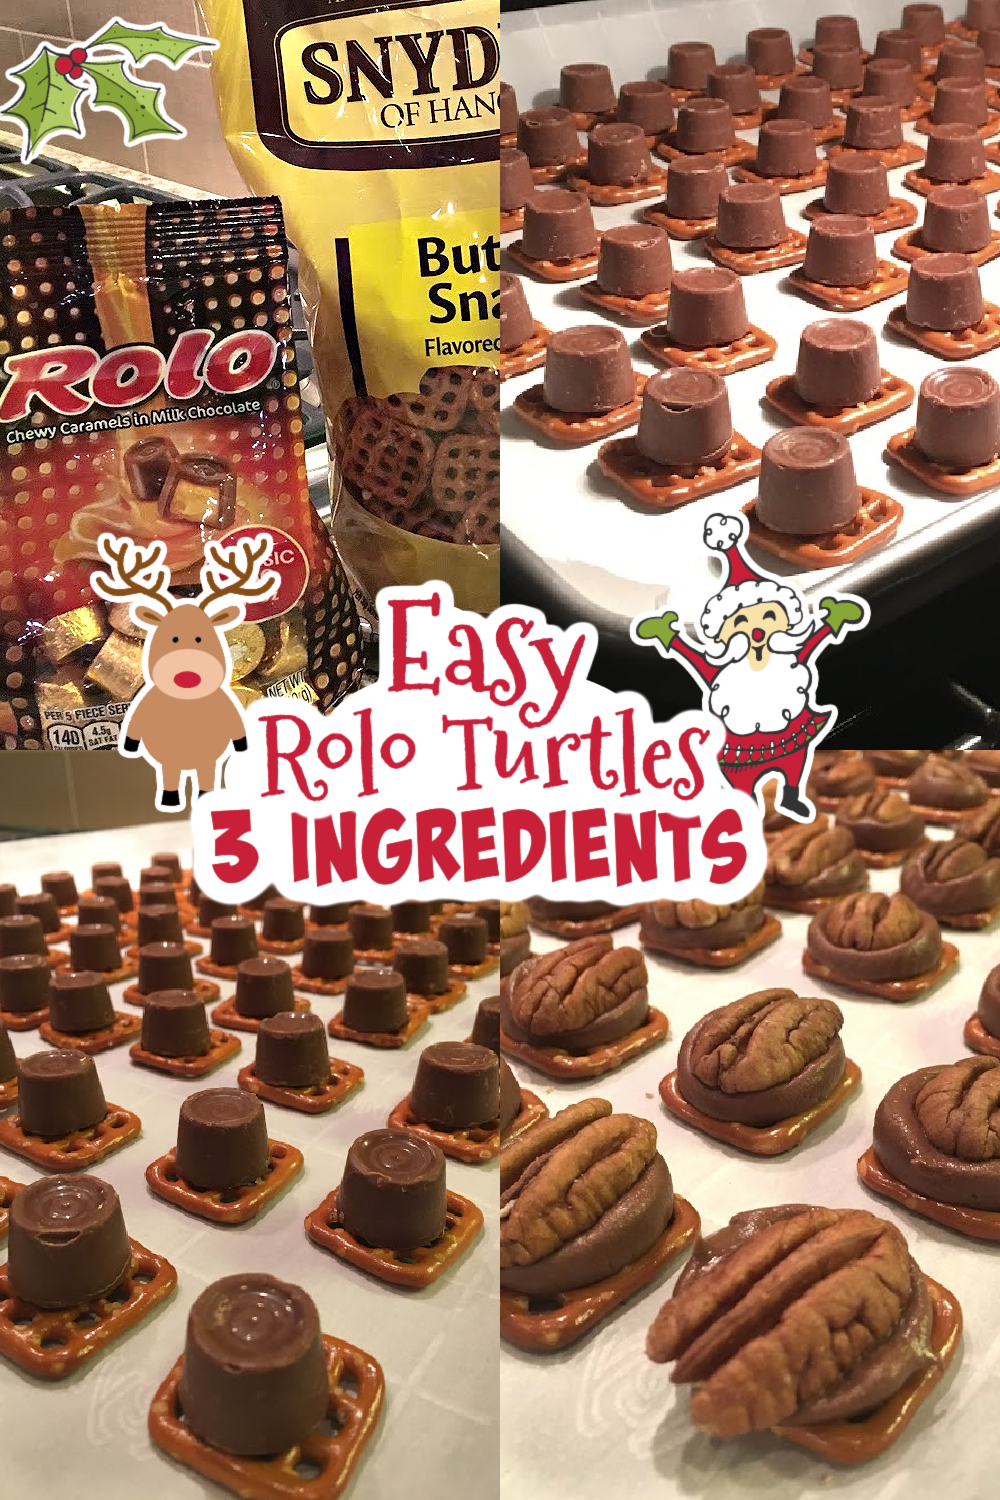 This is a 4 photo collage showing the Rolo Turtles being made. 